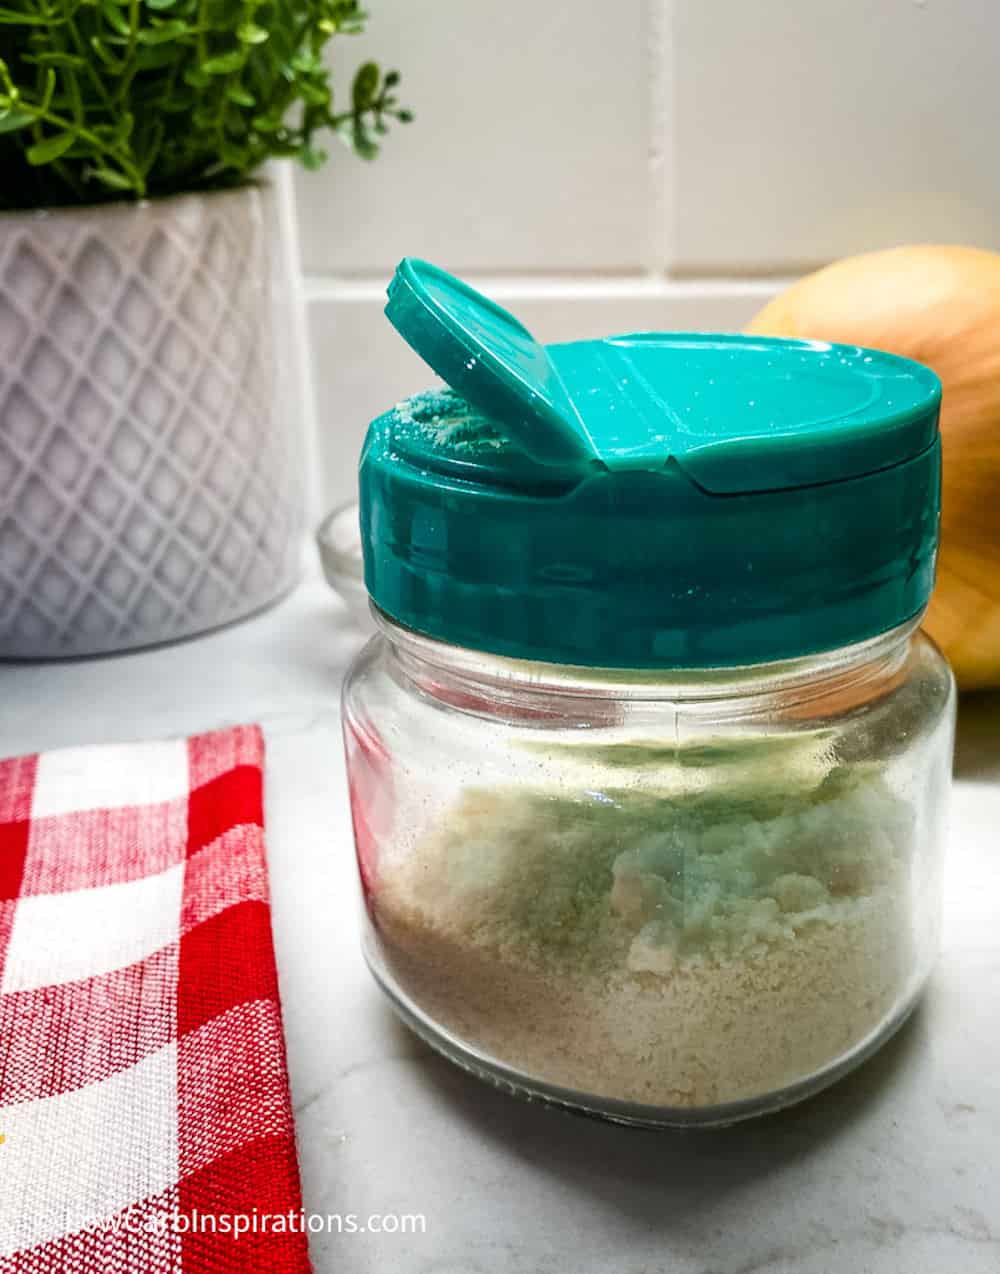 Small mason jar with a green shaker lid and the jar is filled with parmesan cheese